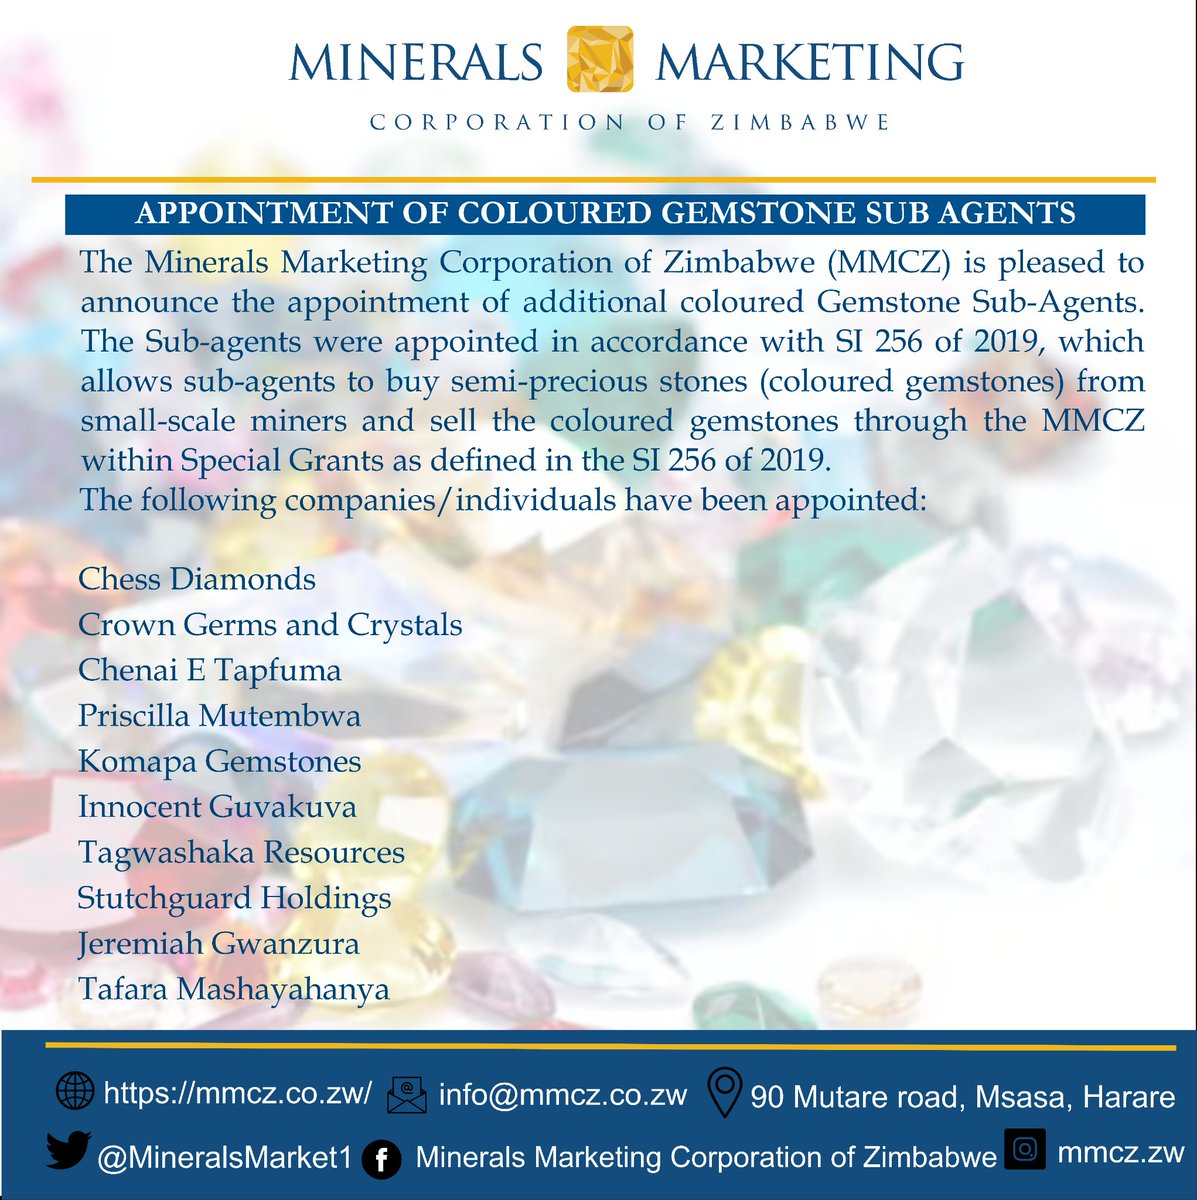 MMCZ is pleased to announce the appointment of additional coloured Gemstone Sub-Agents. 
#gemstones 
#colouredgemstones